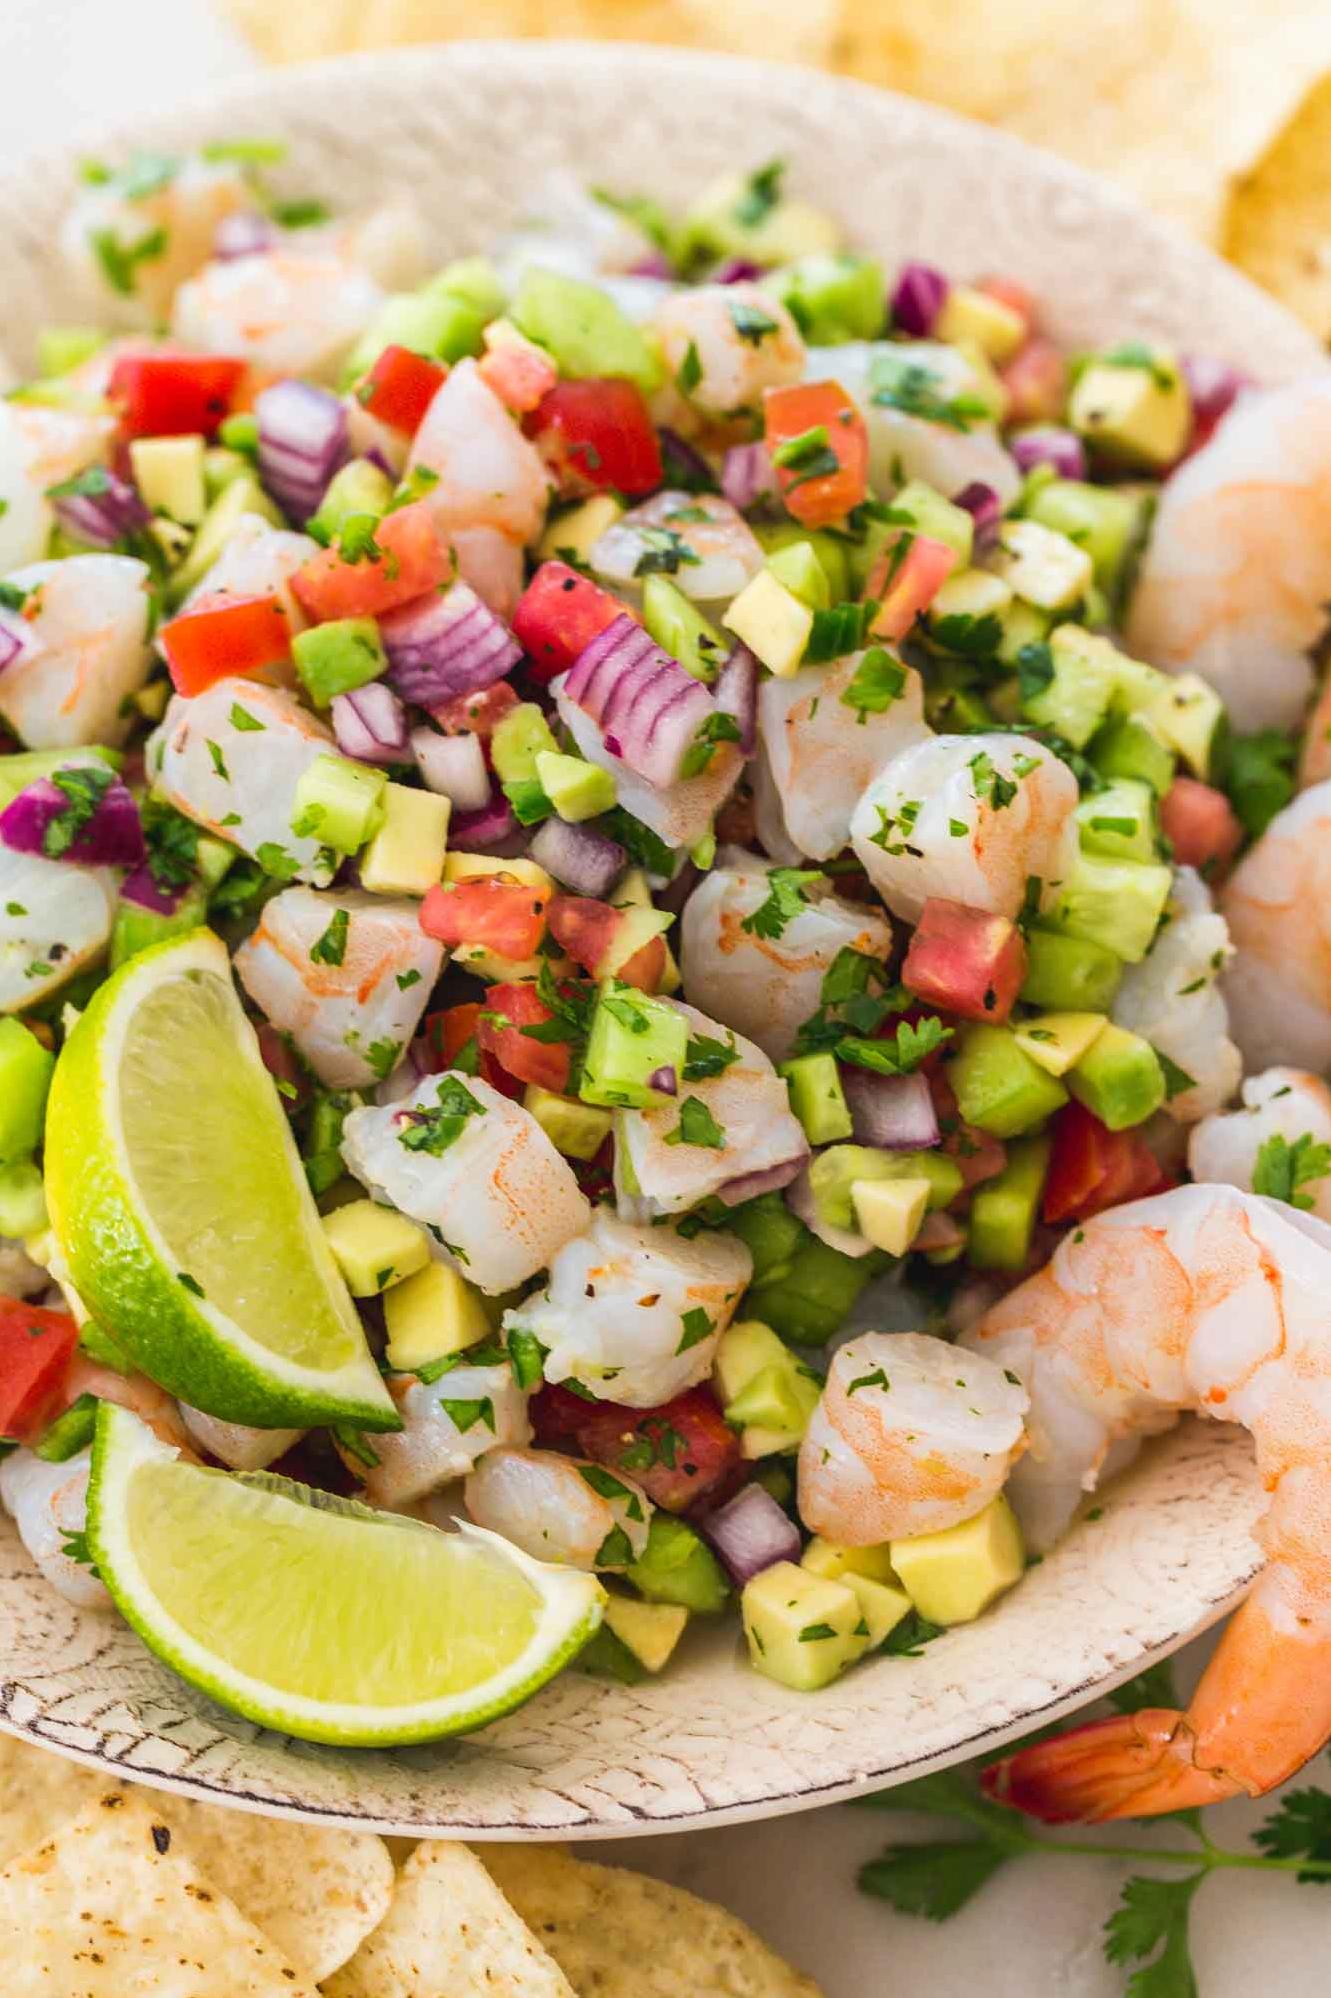  The combination of fresh shrimp, avocado, cilantro and onion creates a flavor explosion in your mouth.